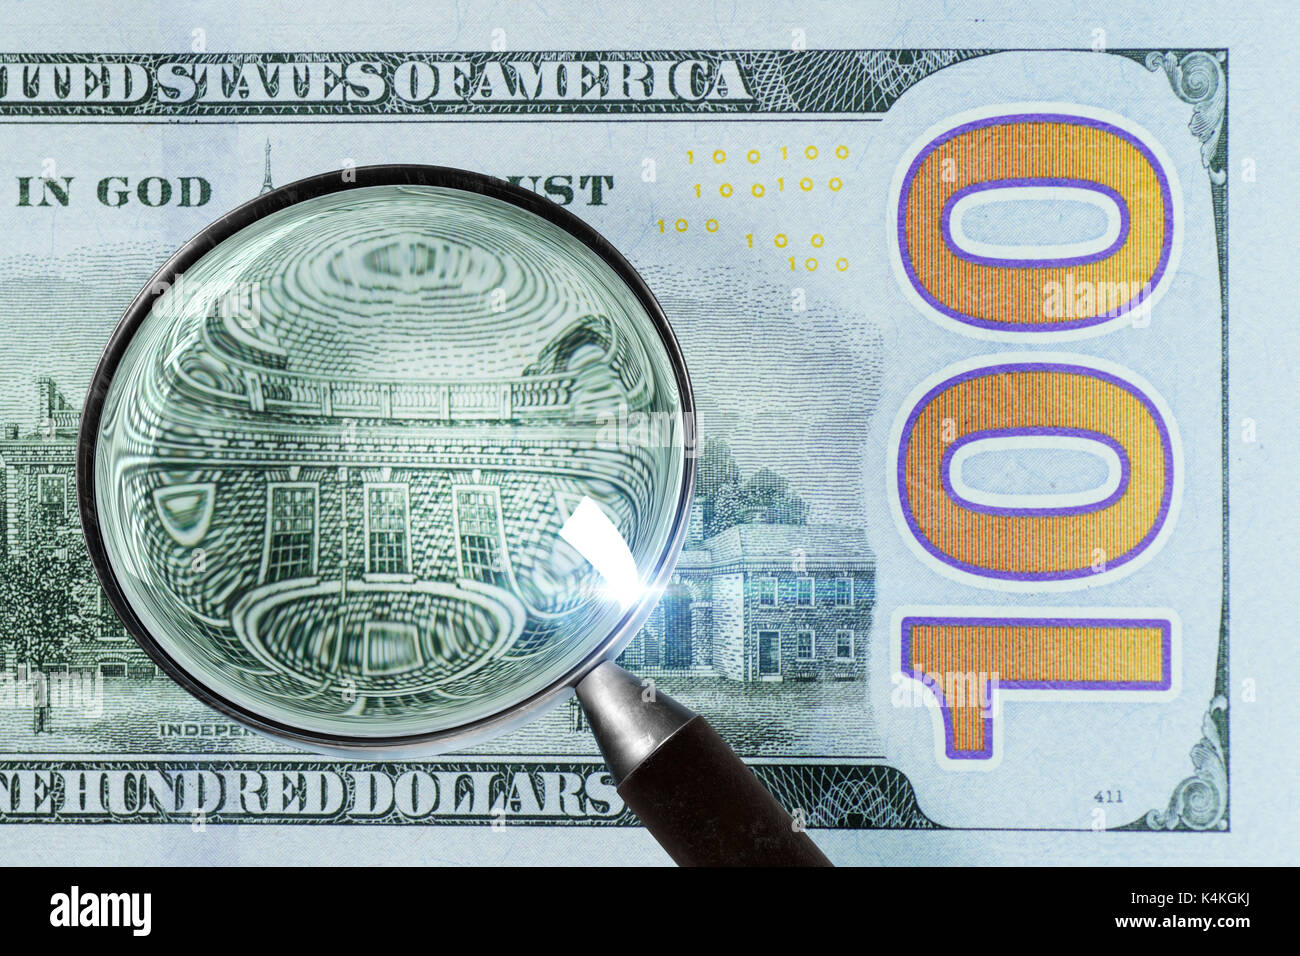 Dollar Watermark High Resolution Stock and Images -